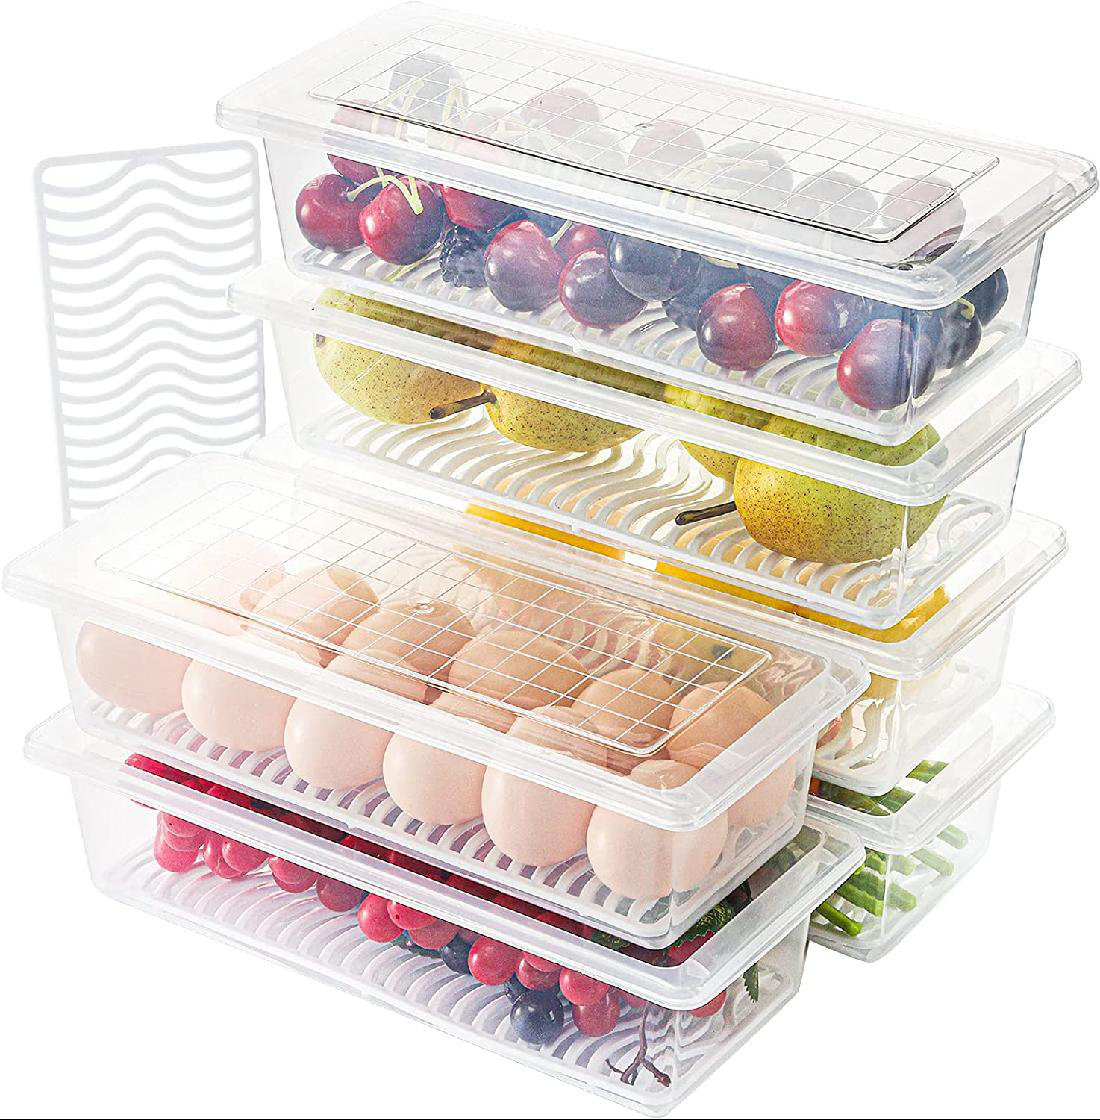 4 Layers Clear Food Tray Fish Storage Box Durable Food-Grade Container Holder